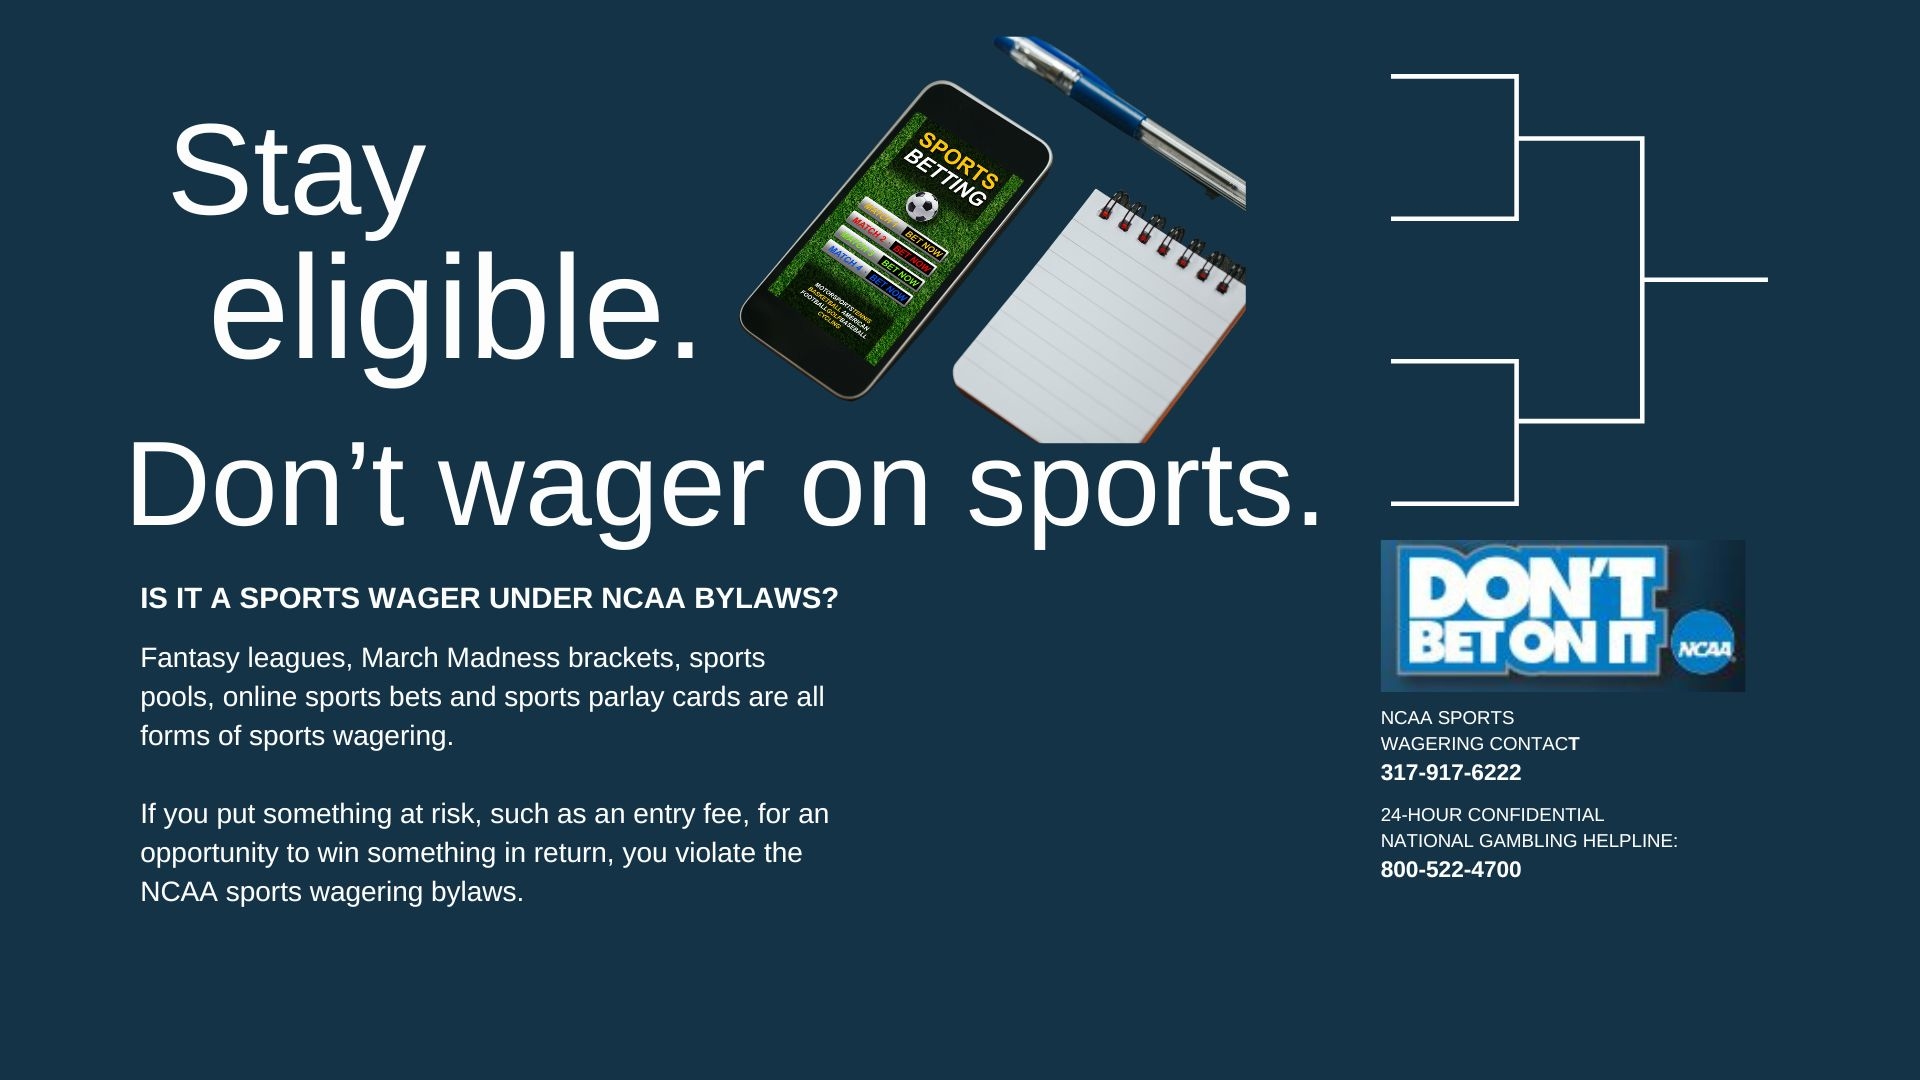 Stay eligible. Don't wager on sports.